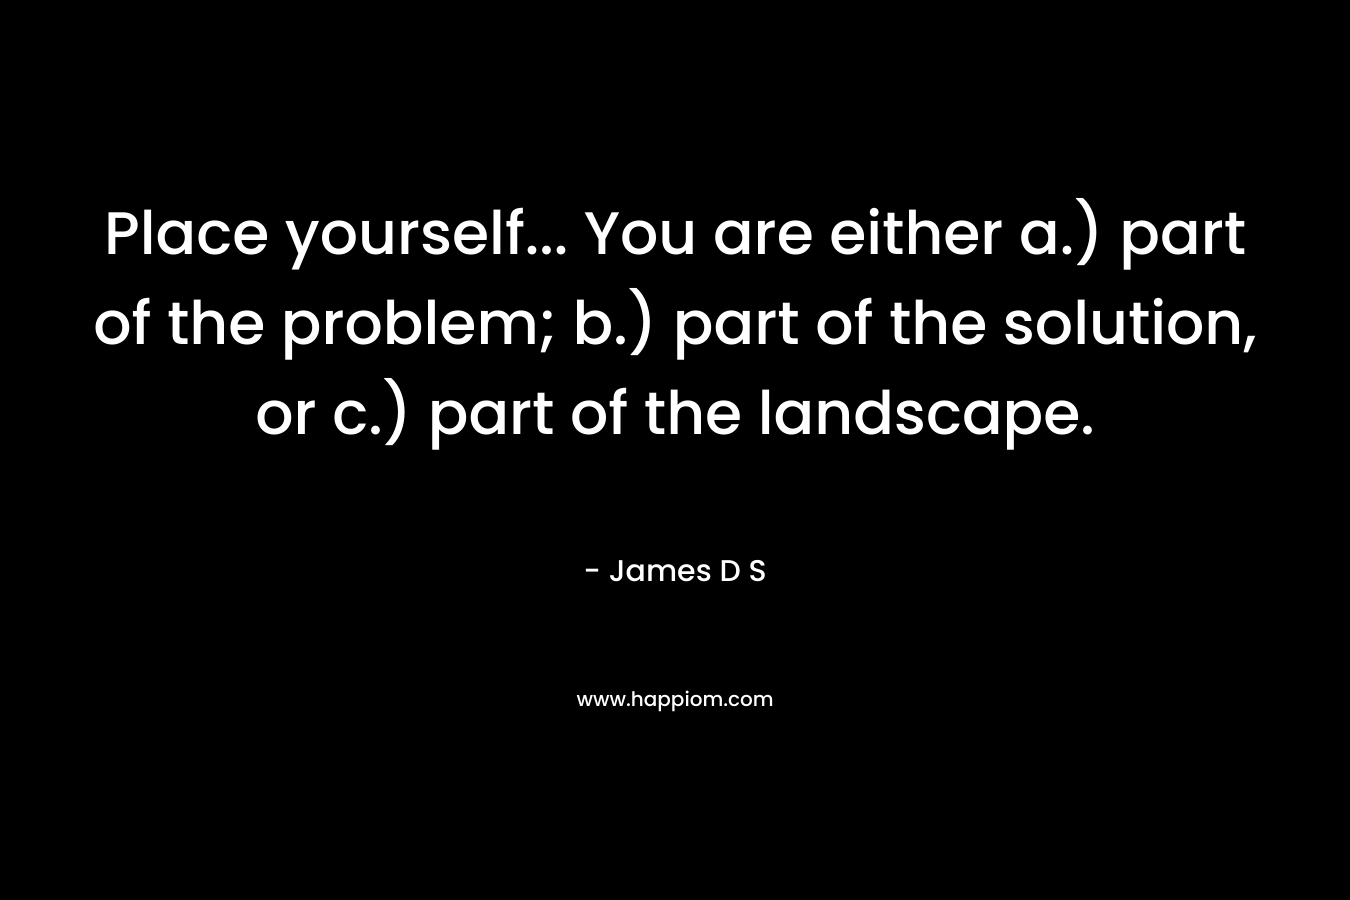 Place yourself... You are either a.) part of the problem; b.) part of the solution, or c.) part of the landscape.